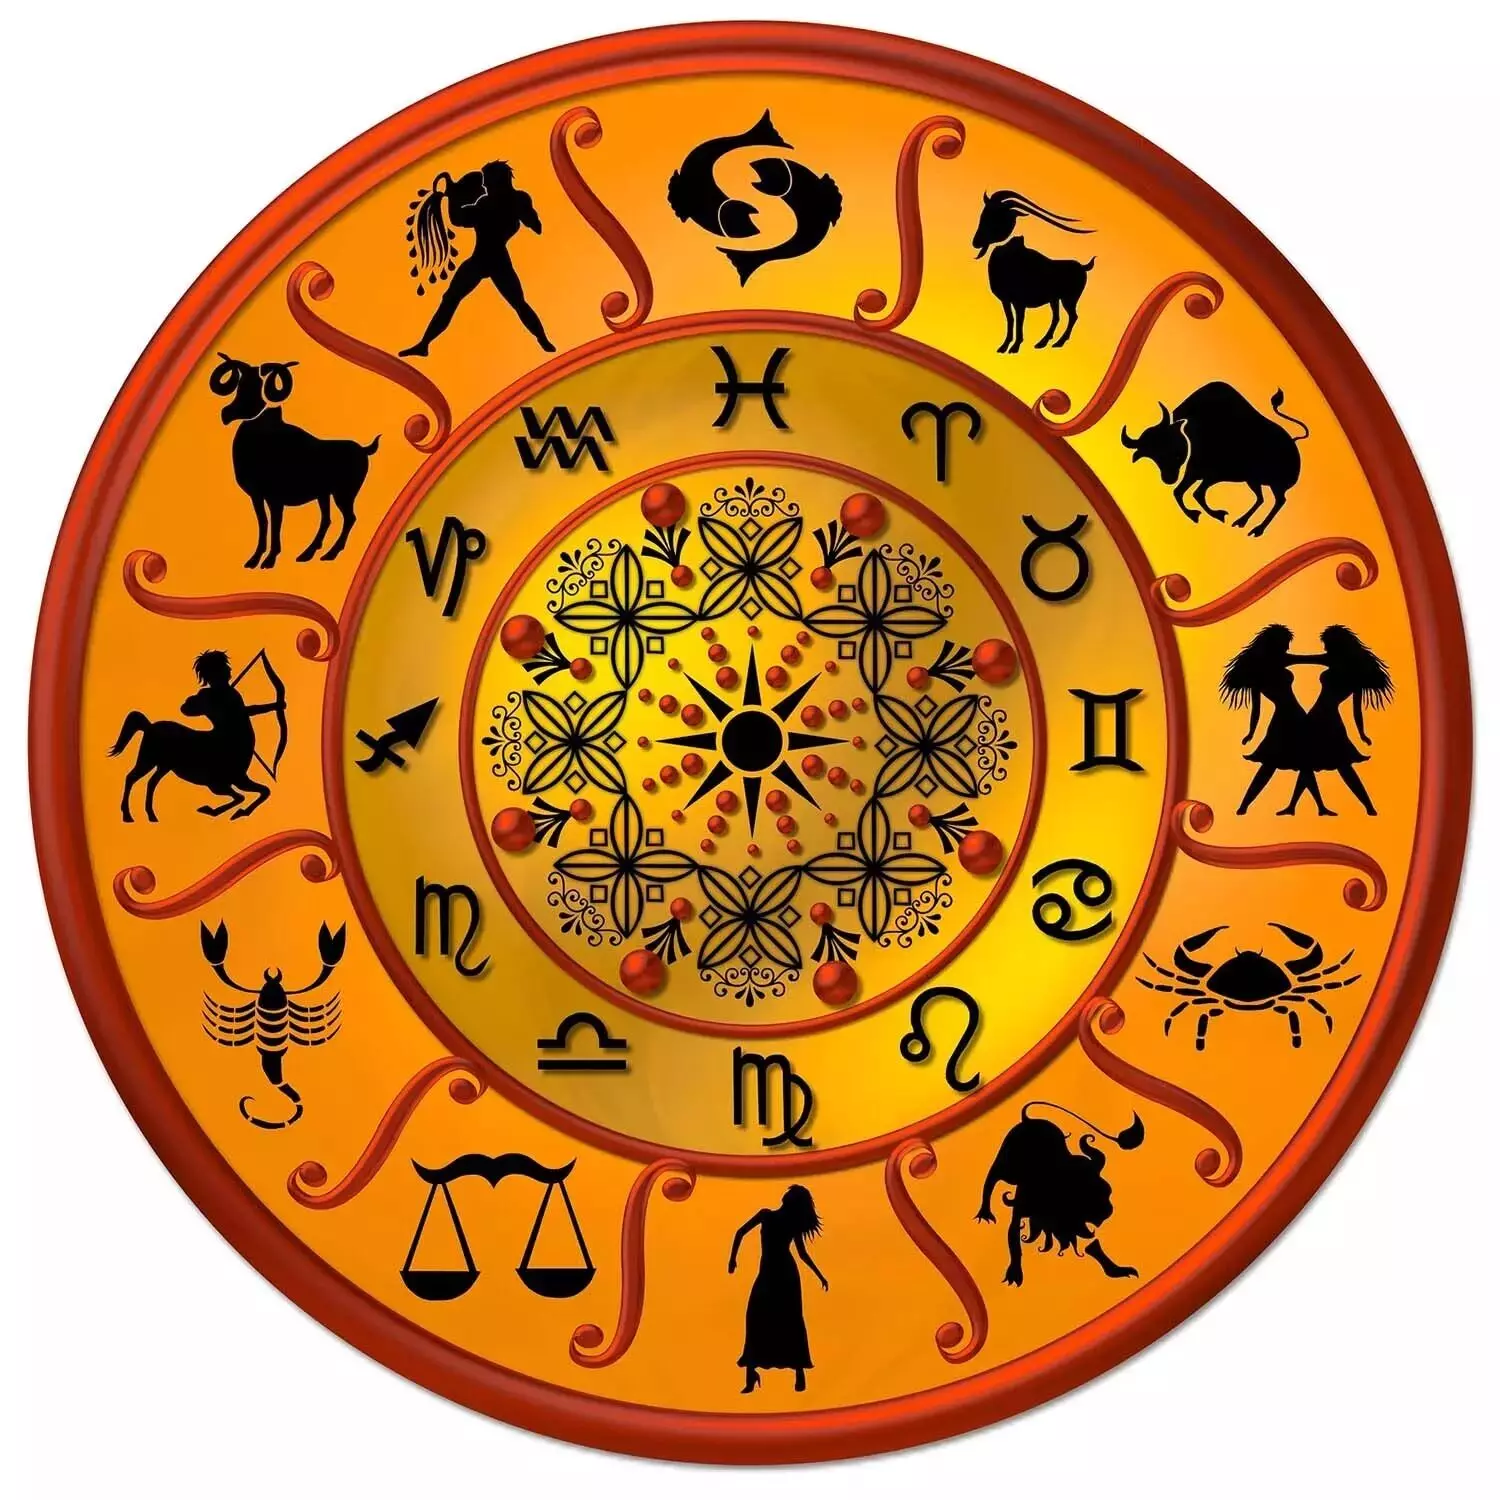 23 September  – Know your todays horoscope